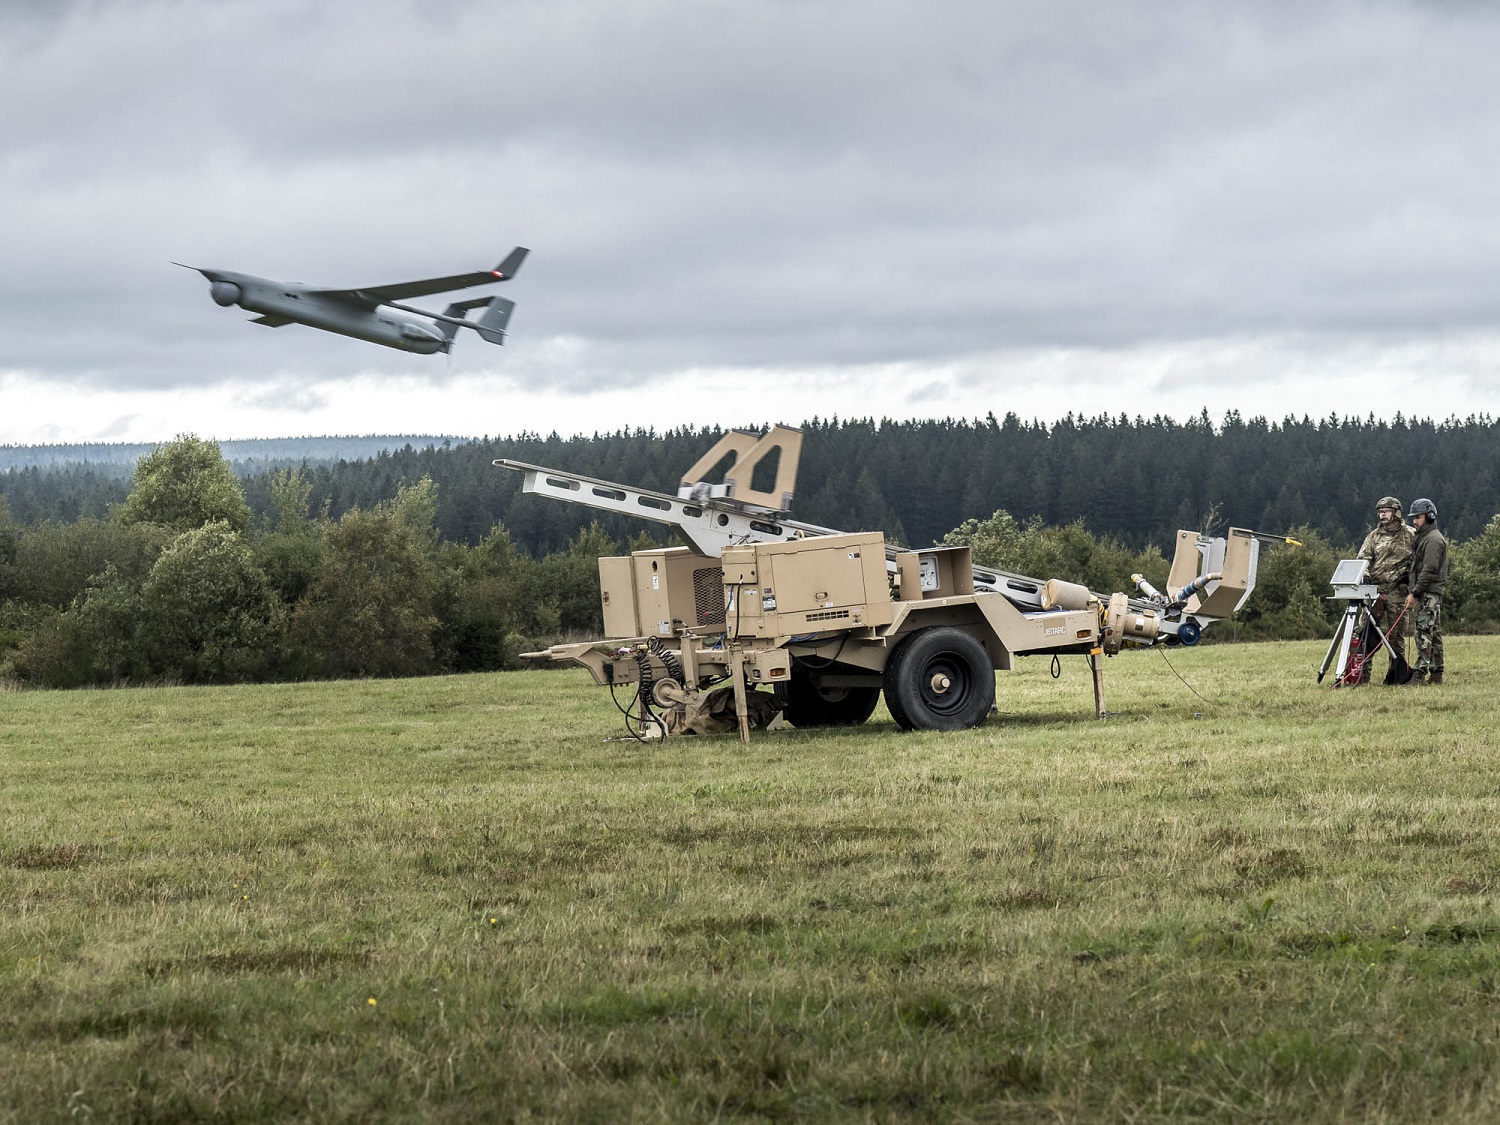 Belgian Armed Forces Integrator Drone Takes Flight on National Day